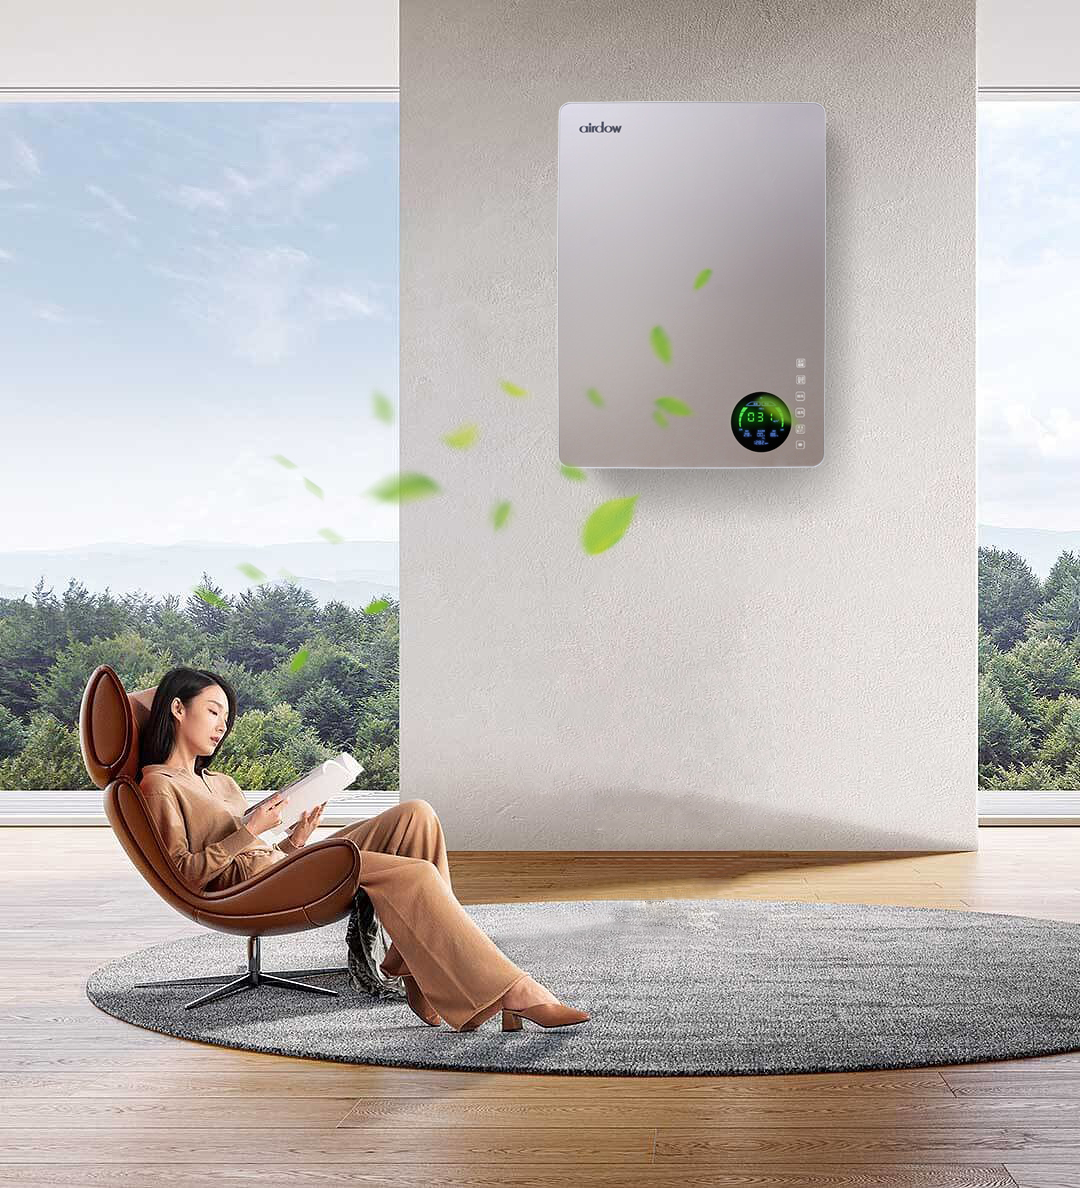 It’s time to use an air purifier